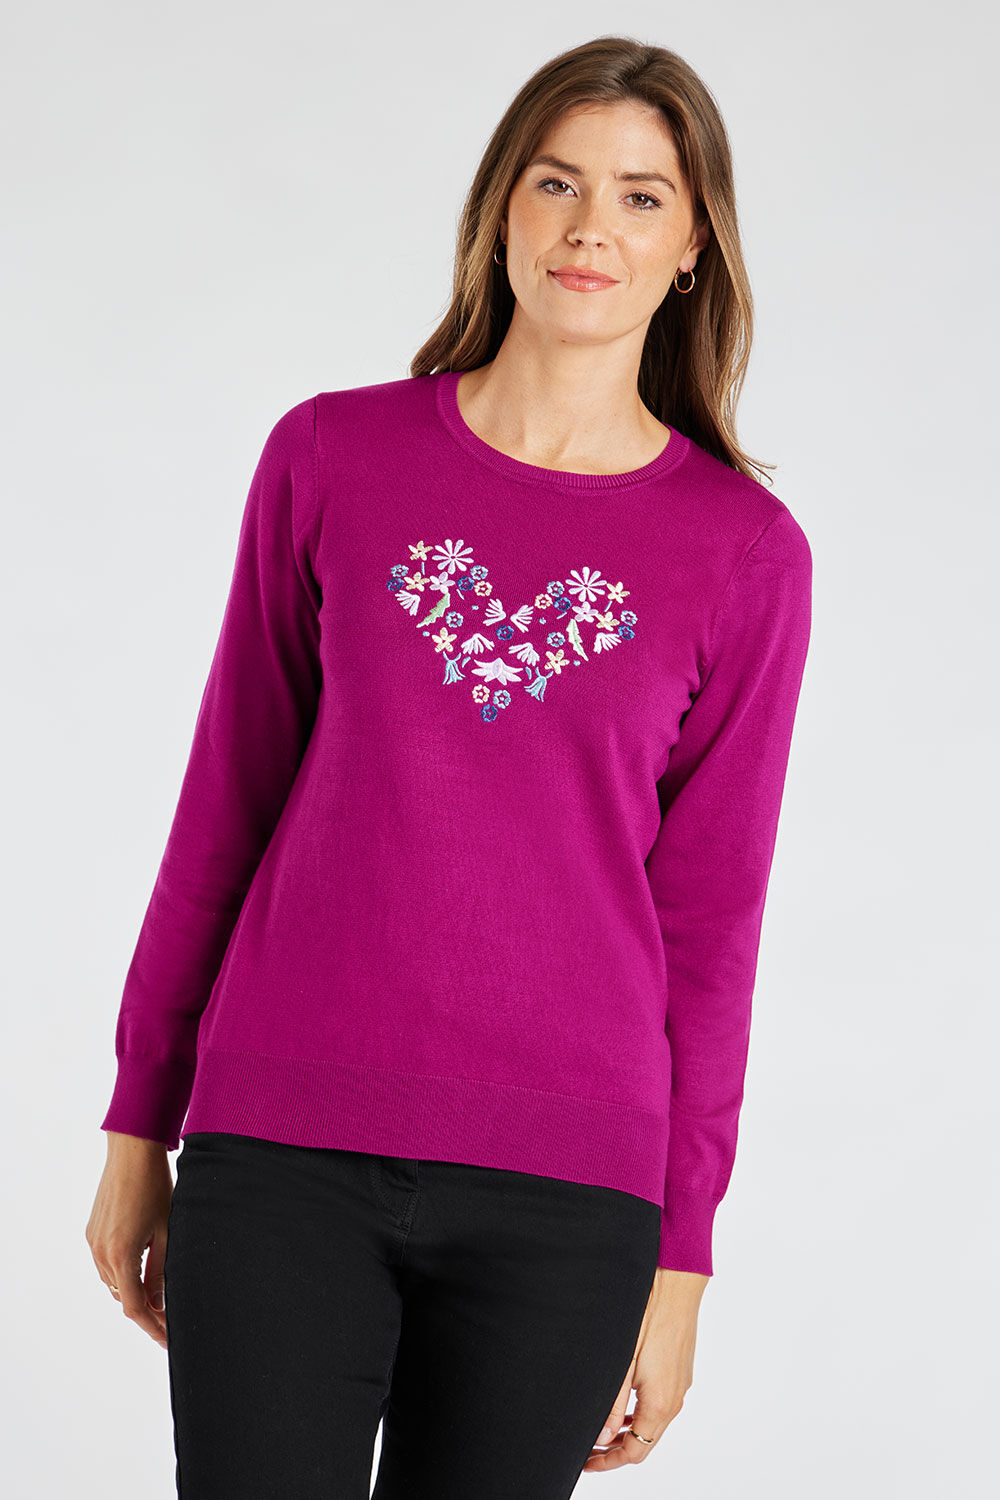 Bonmarche Magenta Long Sleeve Heart Embroidered Jumper, Size: 10